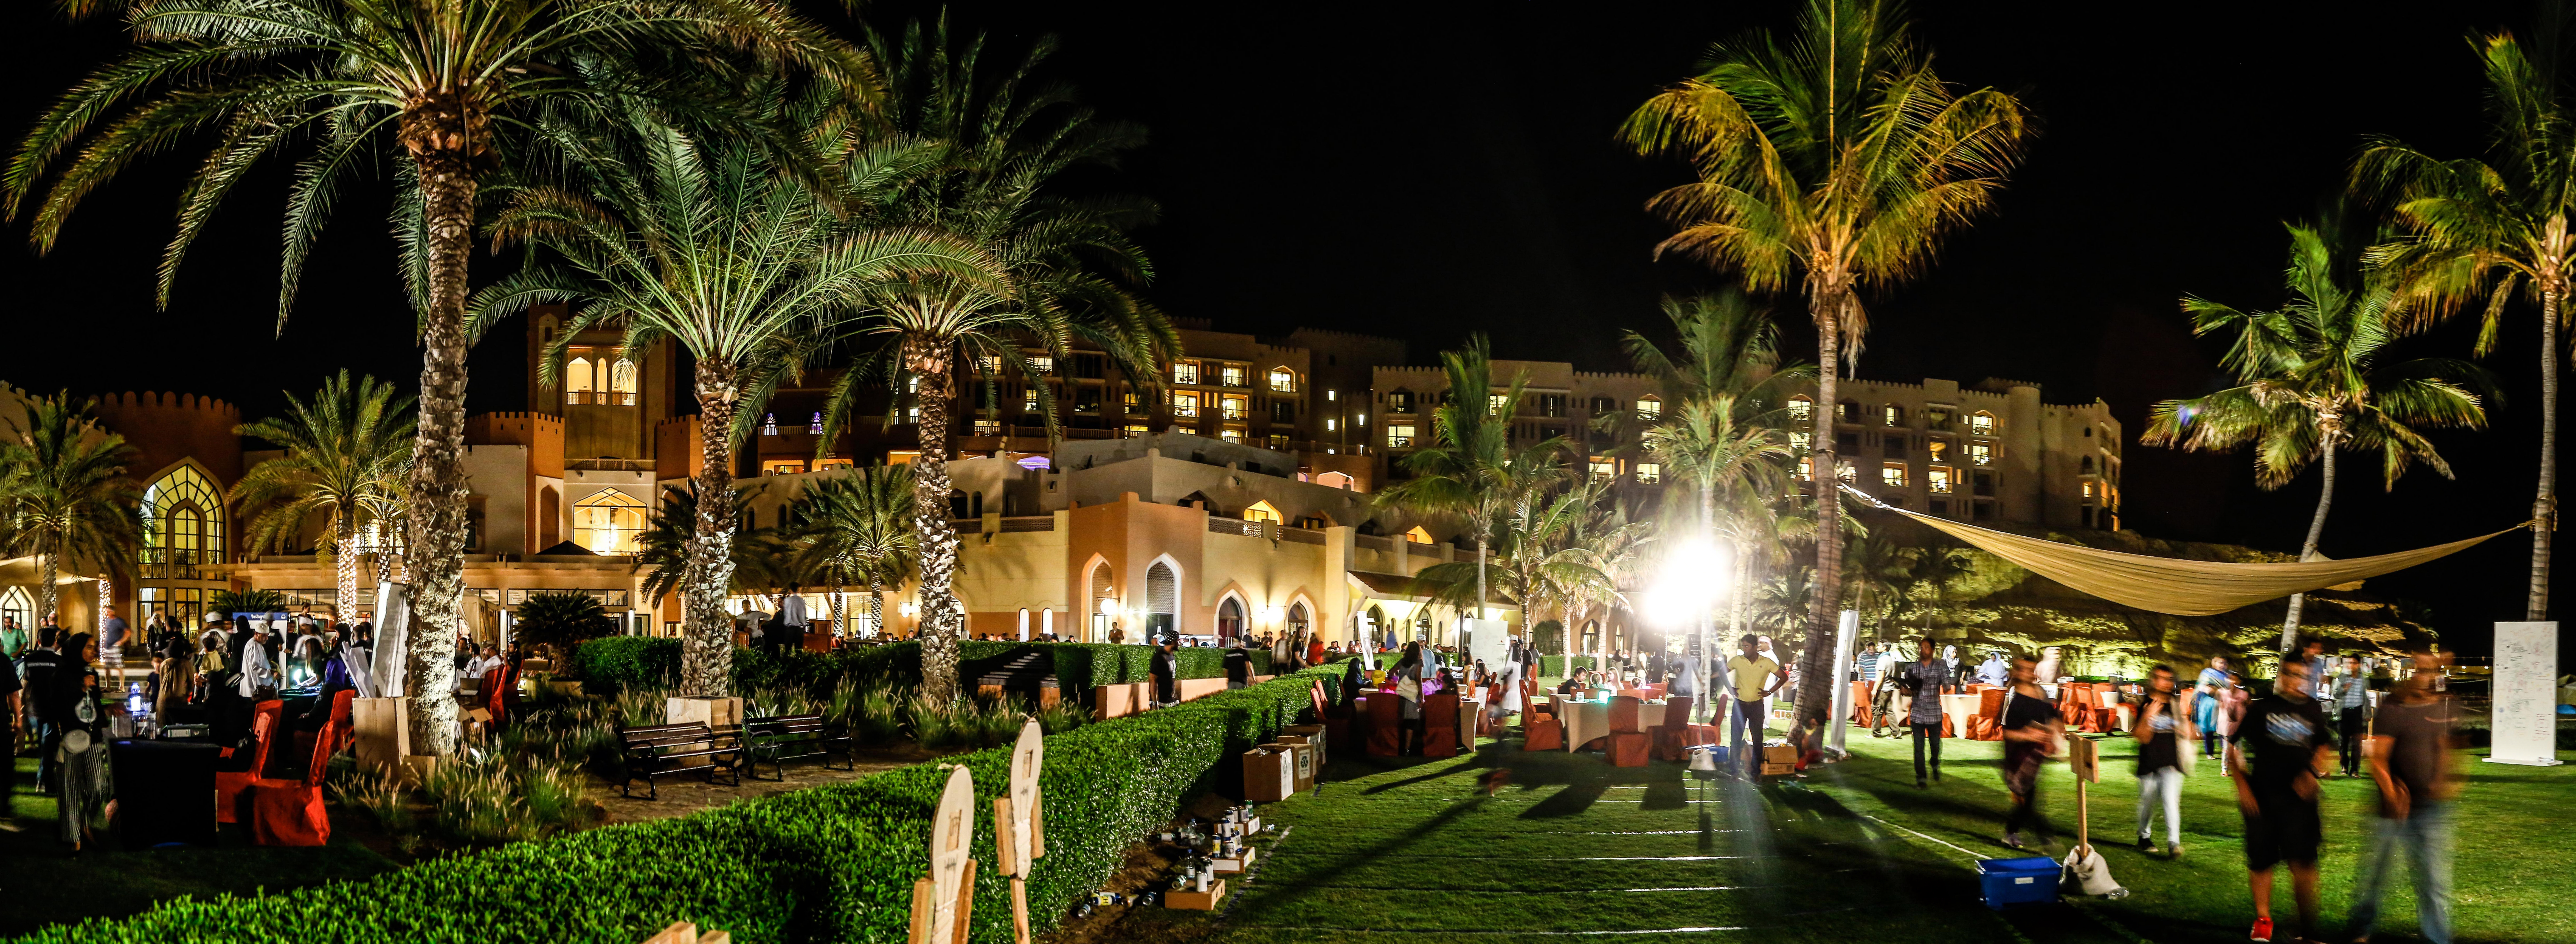 In Pictures: Oman observes Earth Hour